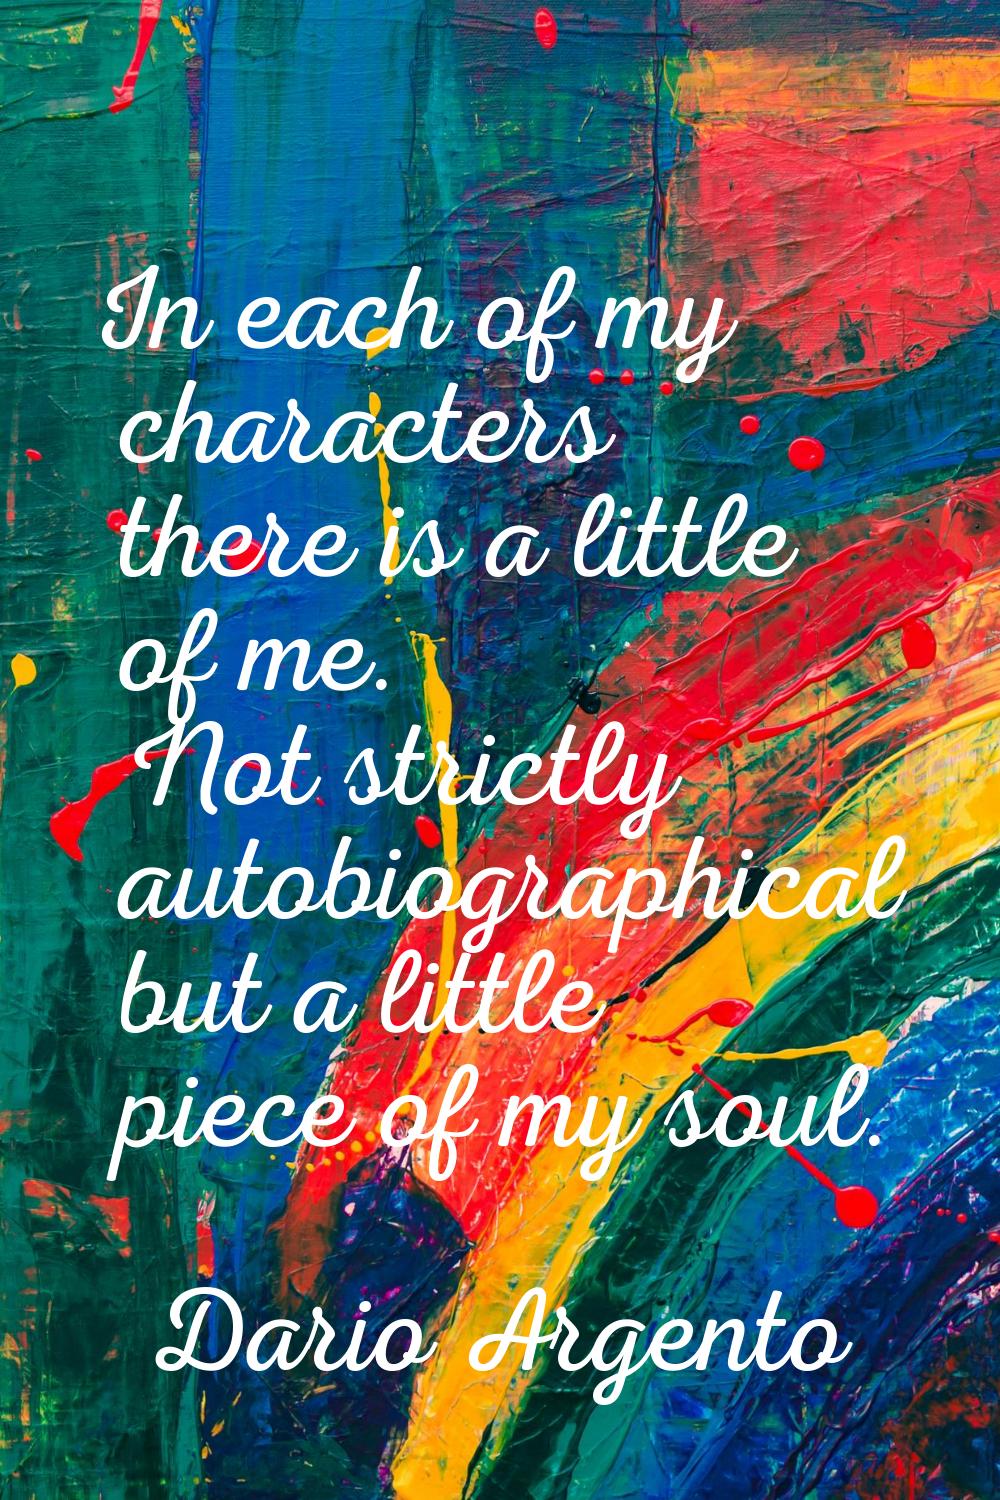 In each of my characters there is a little of me. Not strictly autobiographical but a little piece 